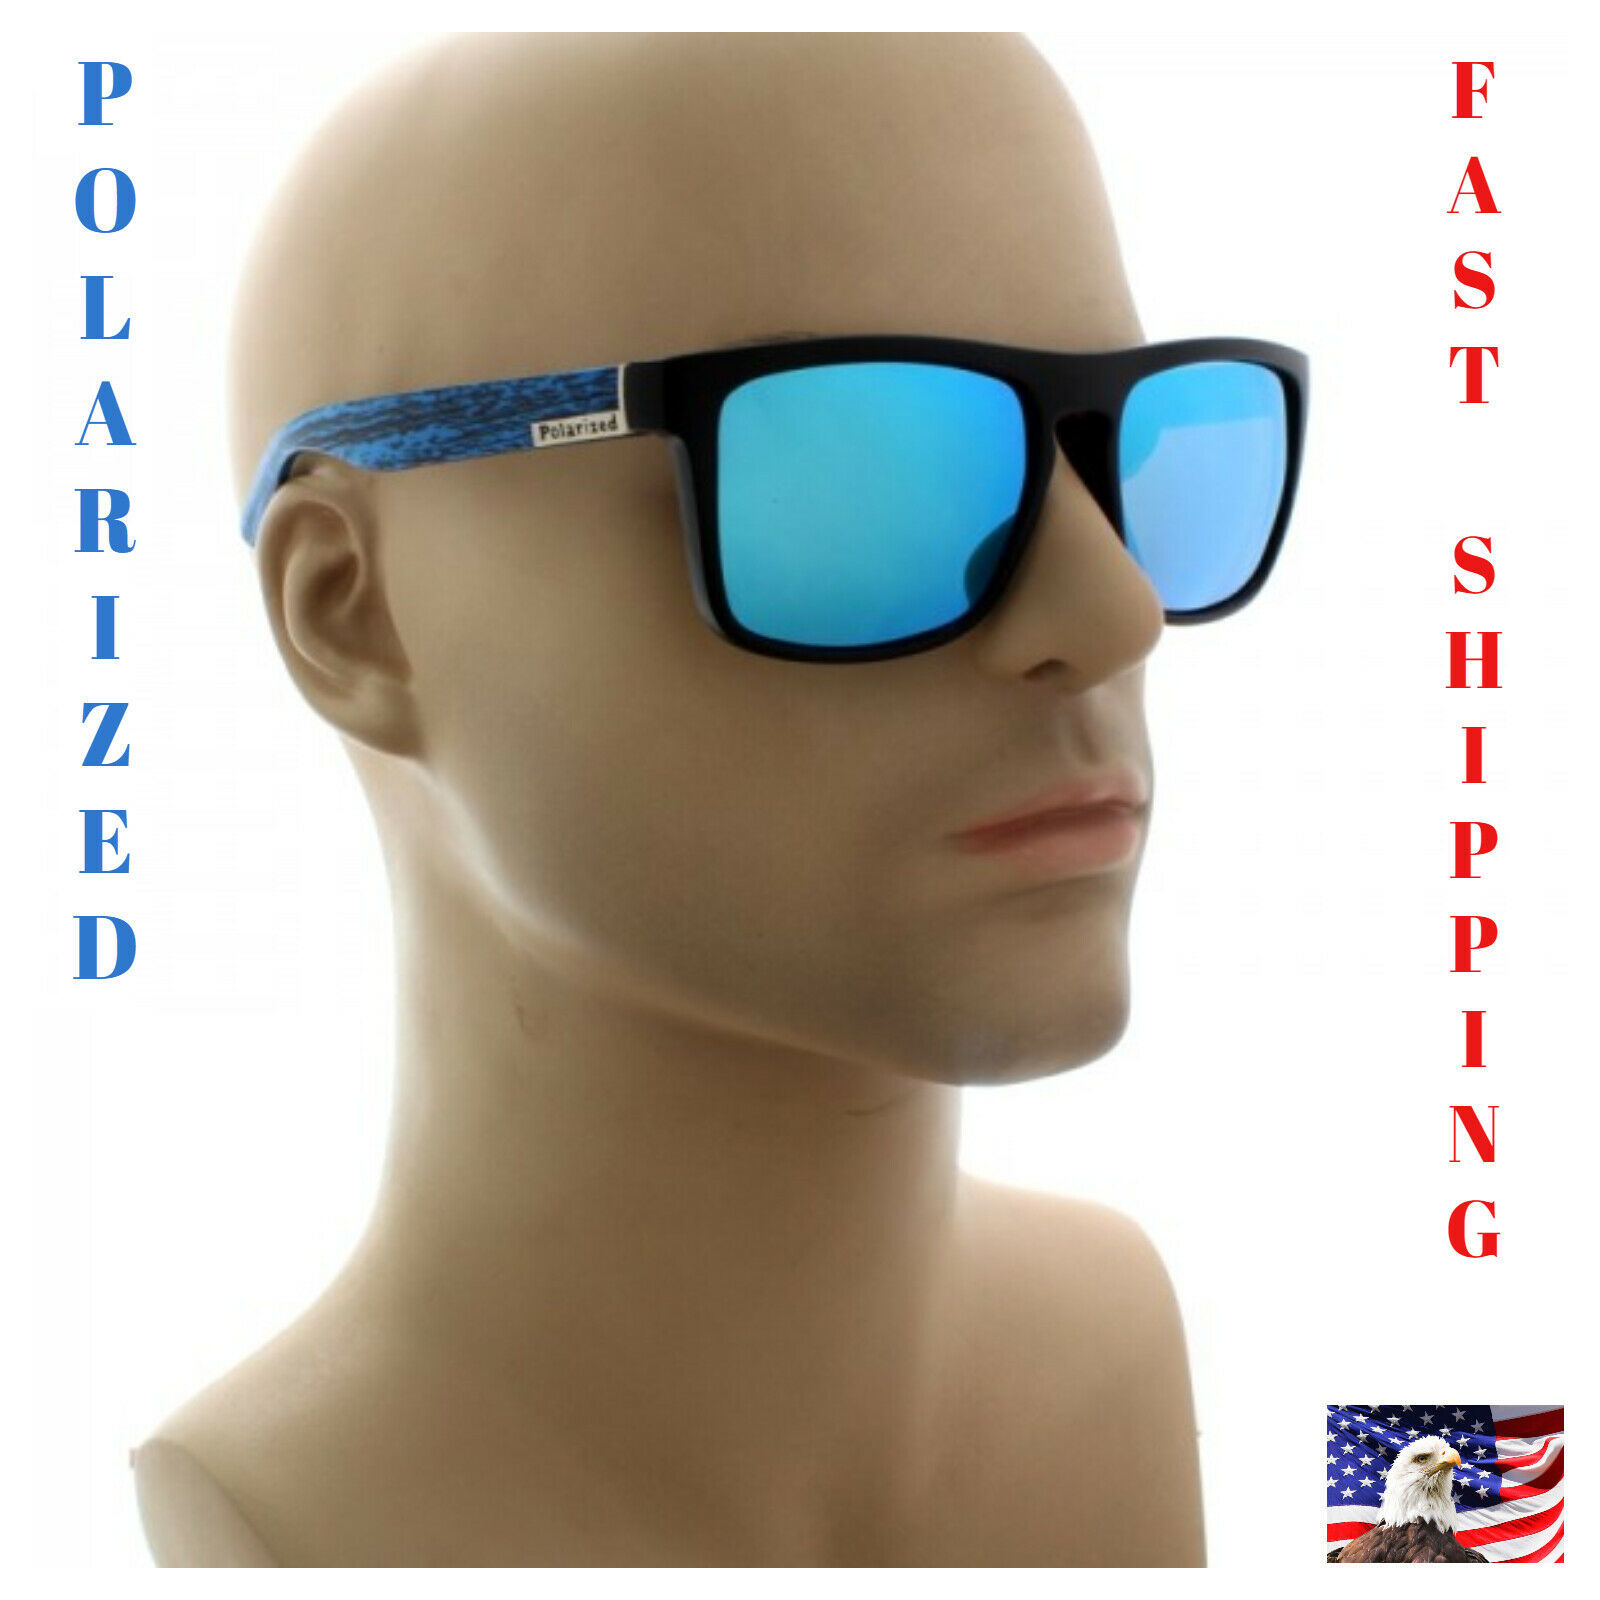 New Frame Polarized Sunglasses Surfing Offshore Surfing camping 2019 Anti-Glare